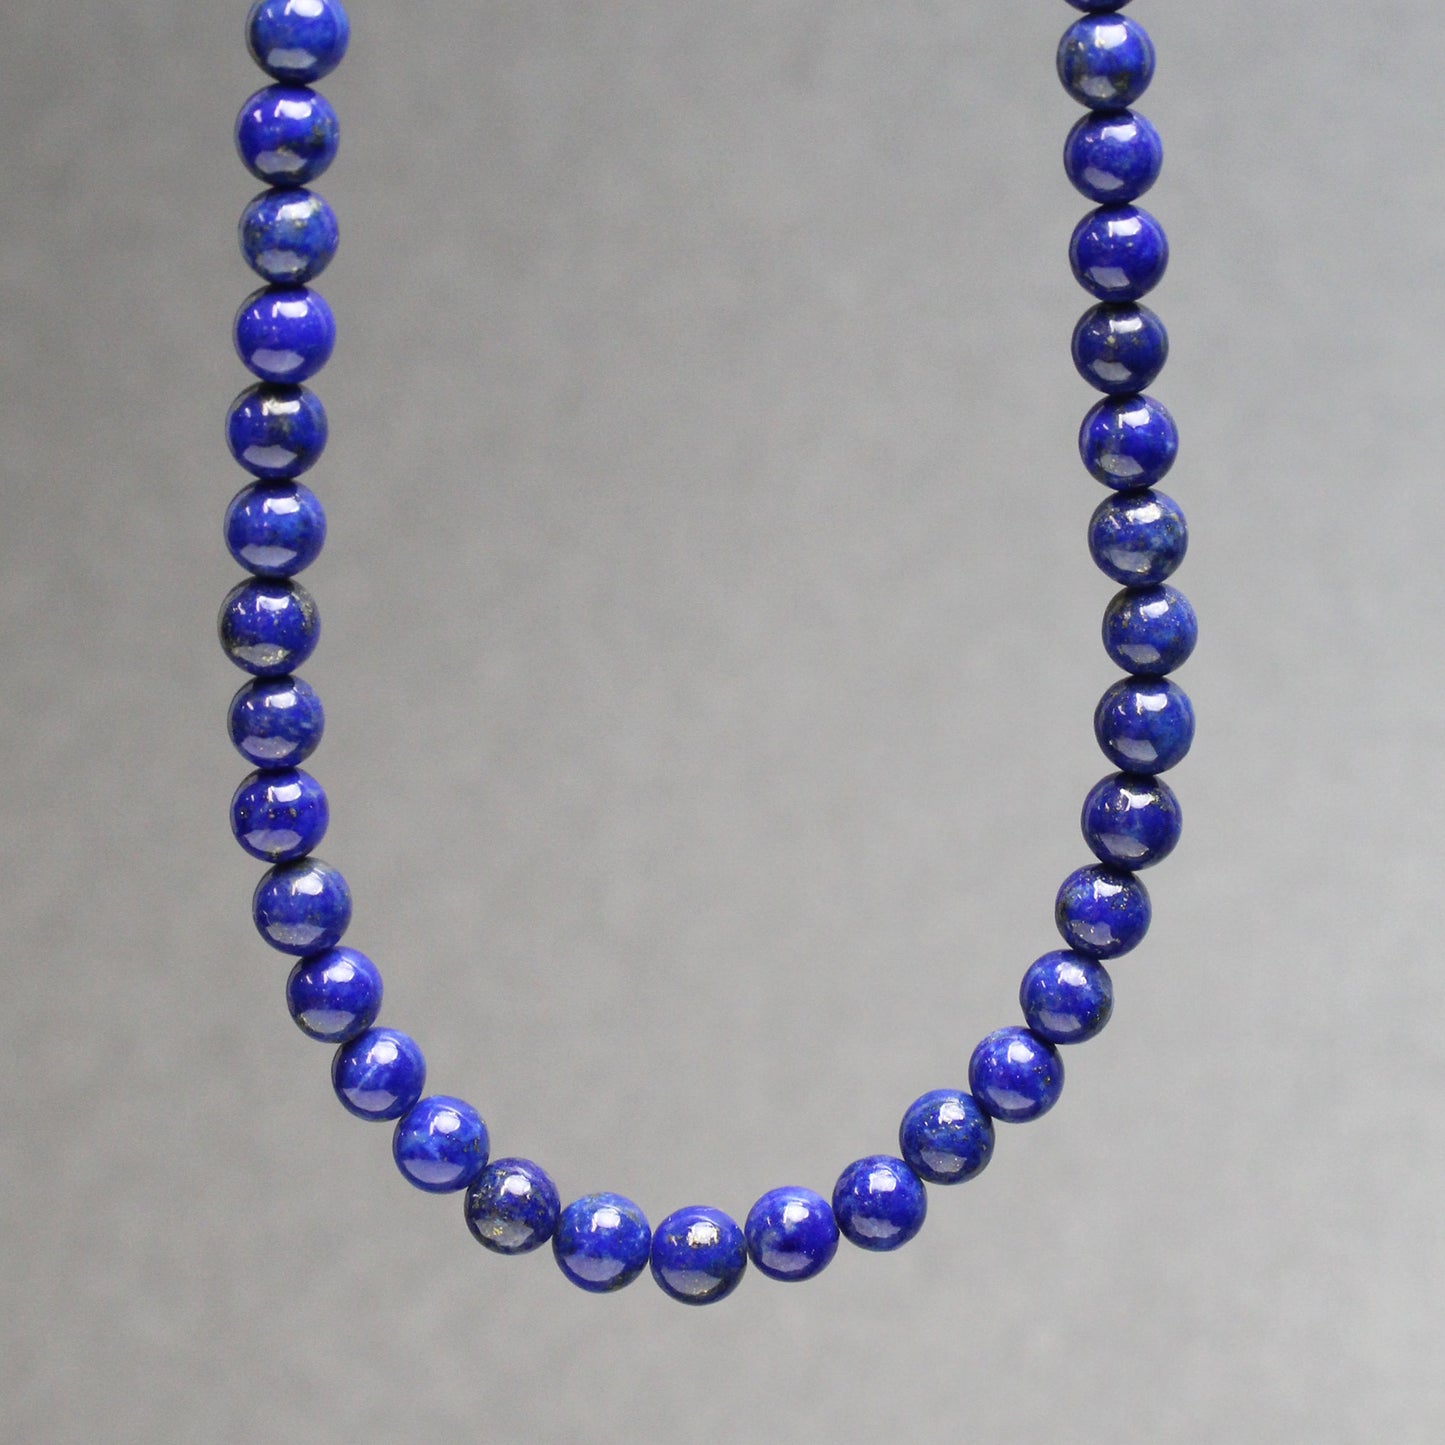 Lapis Lazuli Necklace, 4mm Beads, Sterling Silver Clasp 26 / 14/20 Gold Filled